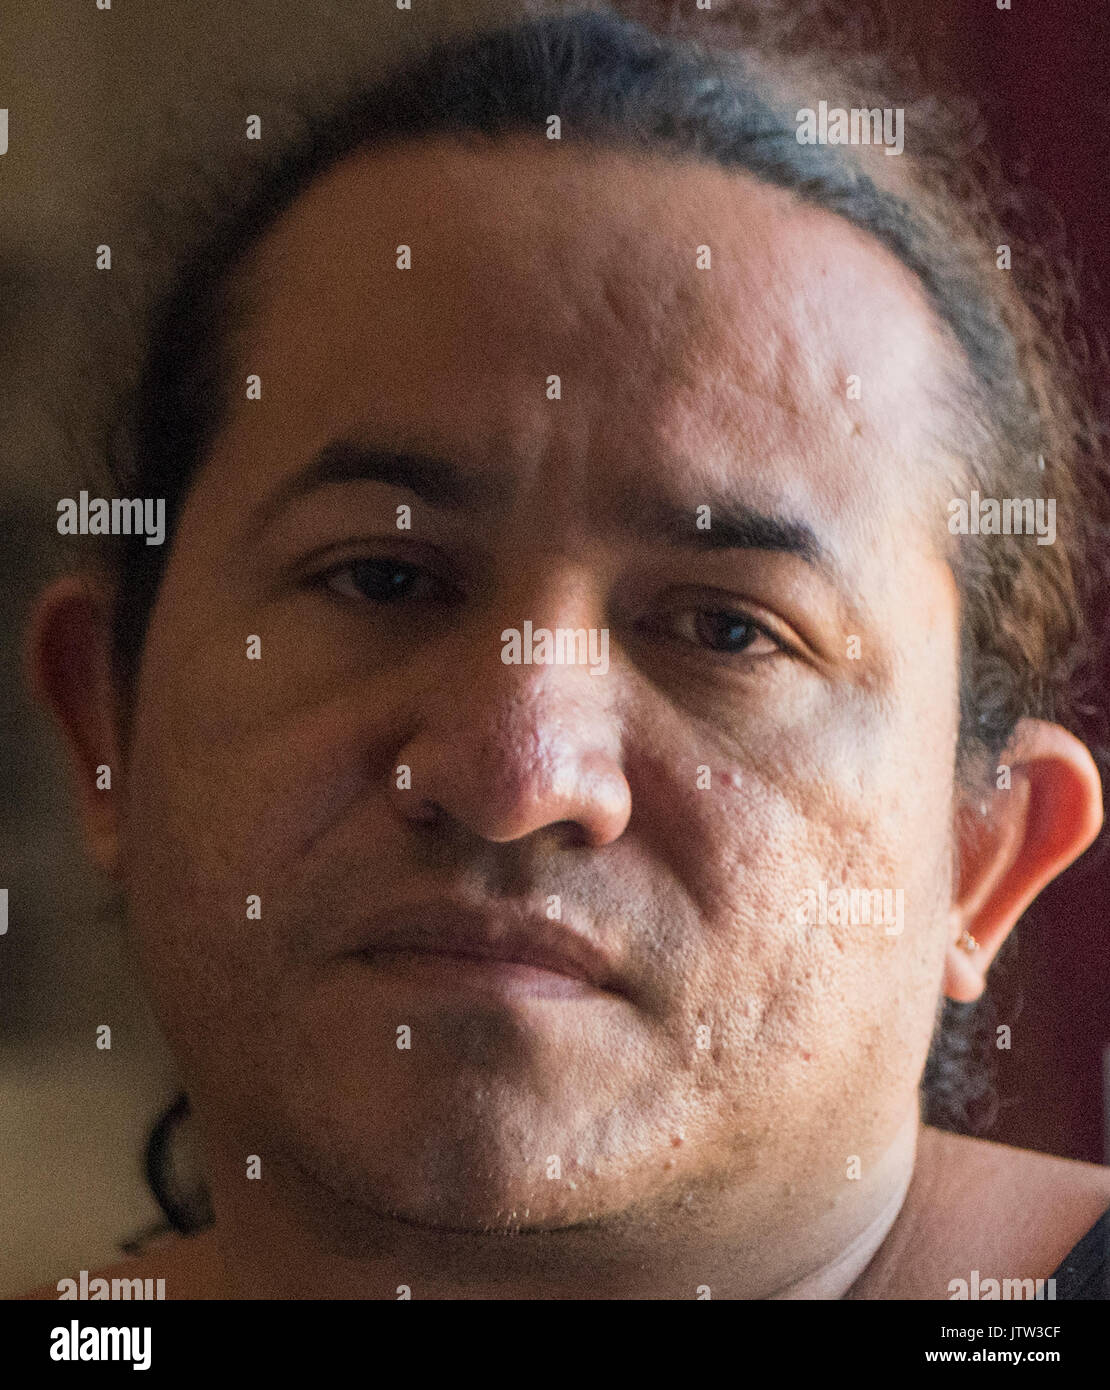 West Palm Beach, Florida, USA. 9th Aug, 2017. Pedro Cruz, 36, is pictured at his aunt's home in Boynton Beach, Fla., on Wednesday, August 9, 2017. Cruz's cousin, 22-year-old Juan Cruz, was killed August 6 defending Pedro during an altercation outside a Lake Worth restaurant. Credit: Andres Leiva/The Palm Beach Post/ZUMA Wire/Alamy Live News Stock Photo